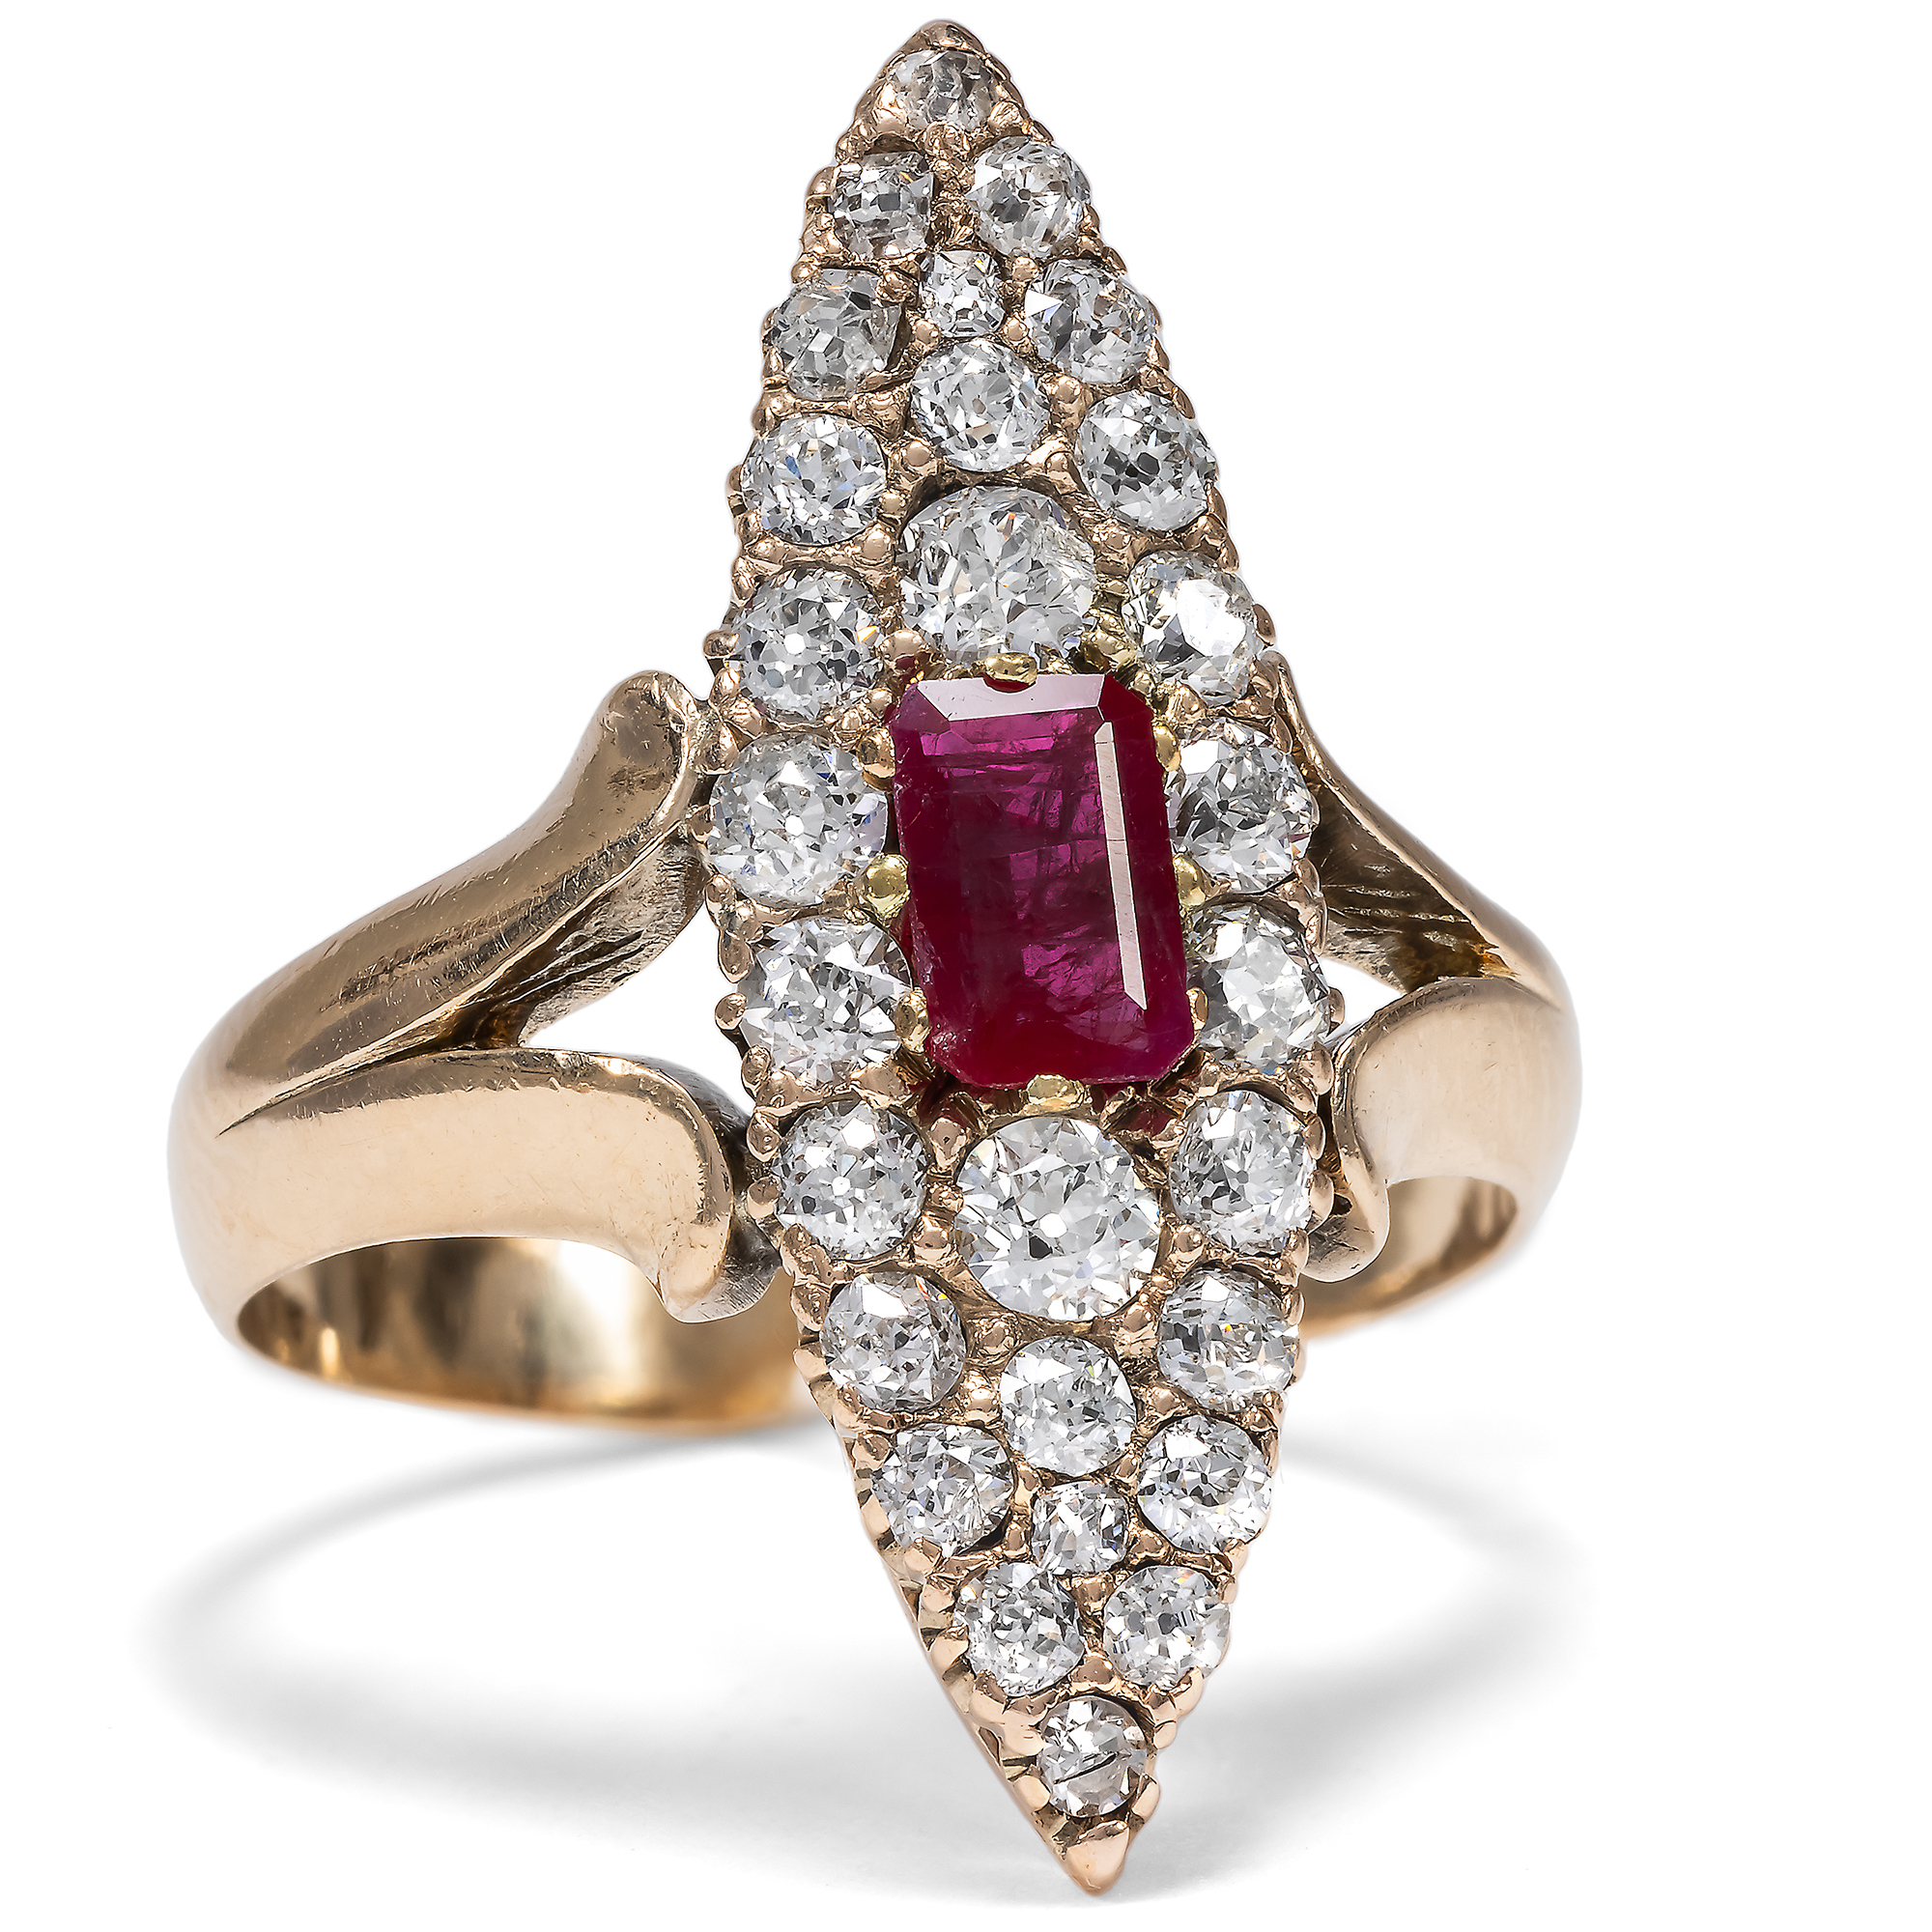 Exquisite Antique Marquise Ring With Ruby & Diamonds In Gold, Circa 1890